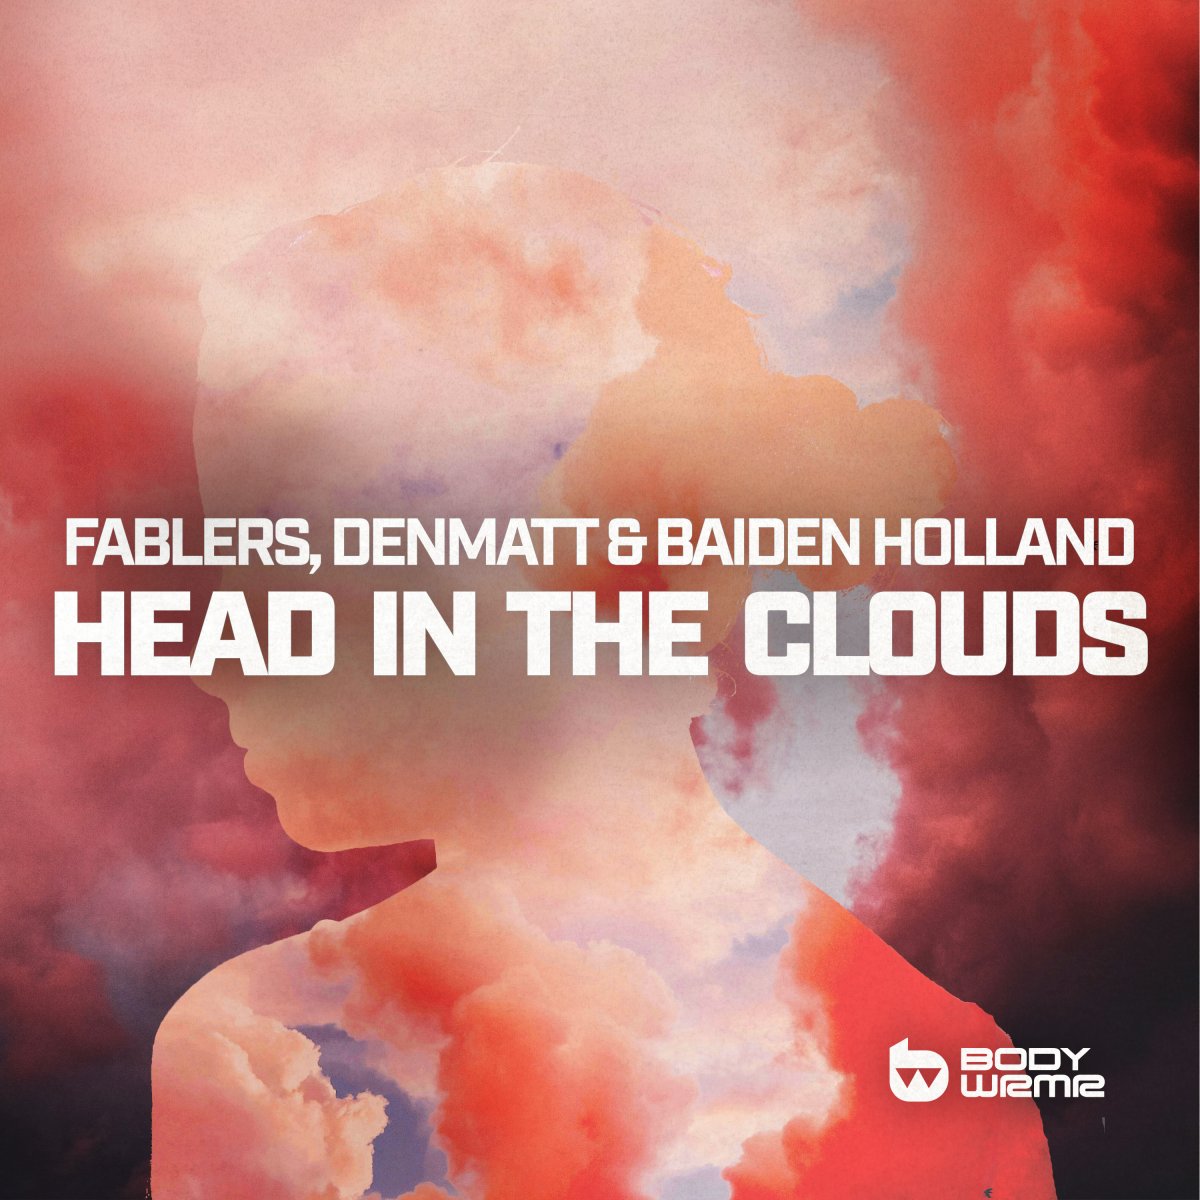 Head In the Clouds - Fablers⁠, Denmatt⁠ & Baiden Holland⁠ 